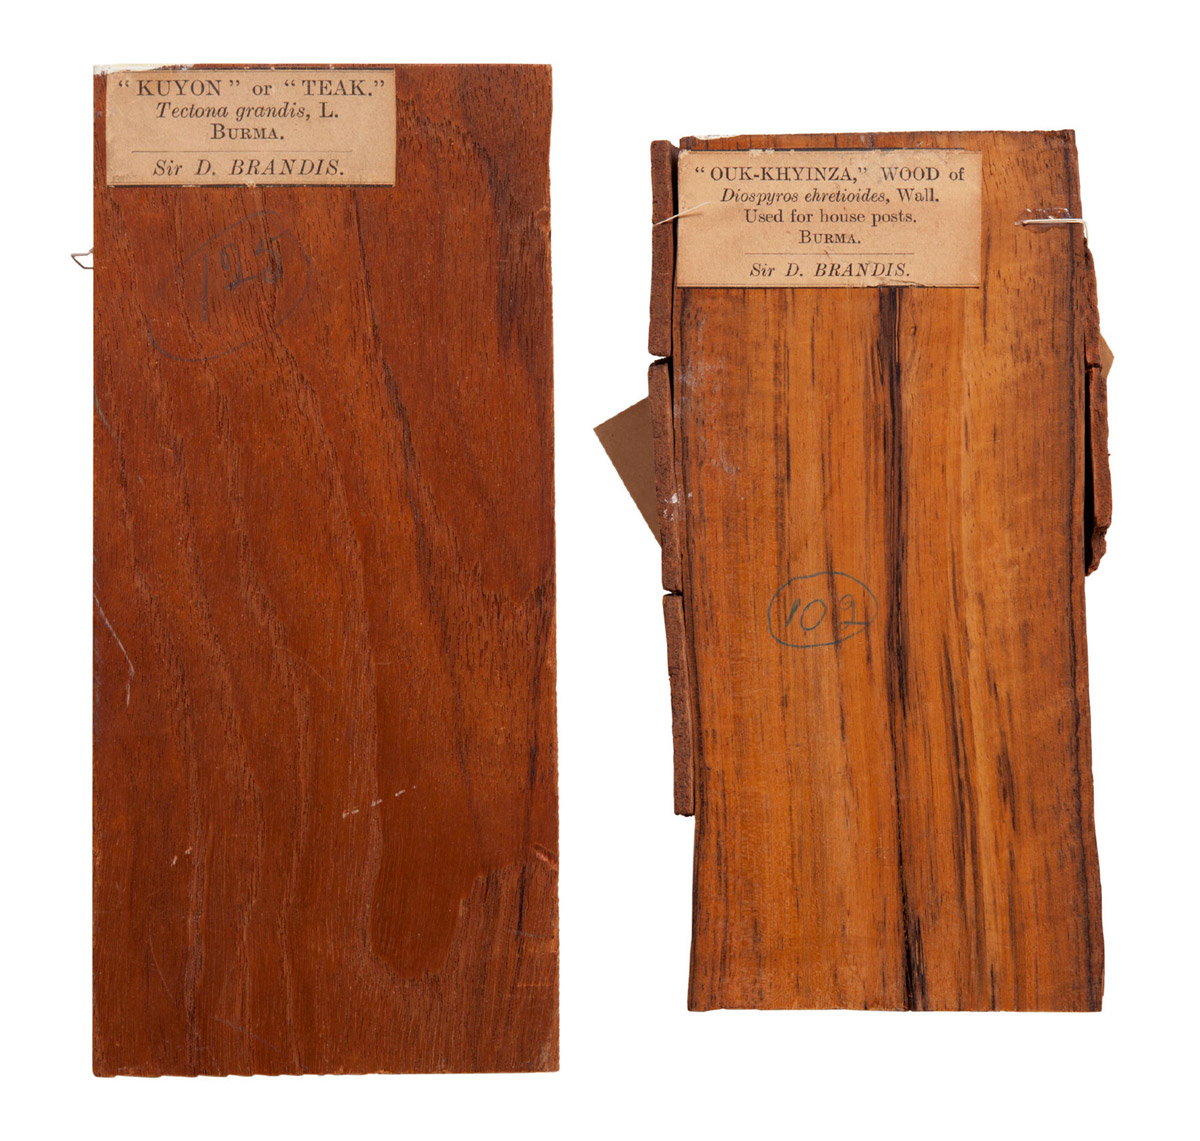 Wood samples sent by Brandis from Burma to the Kew Gardens, London. Courtesy Kew Gardens.